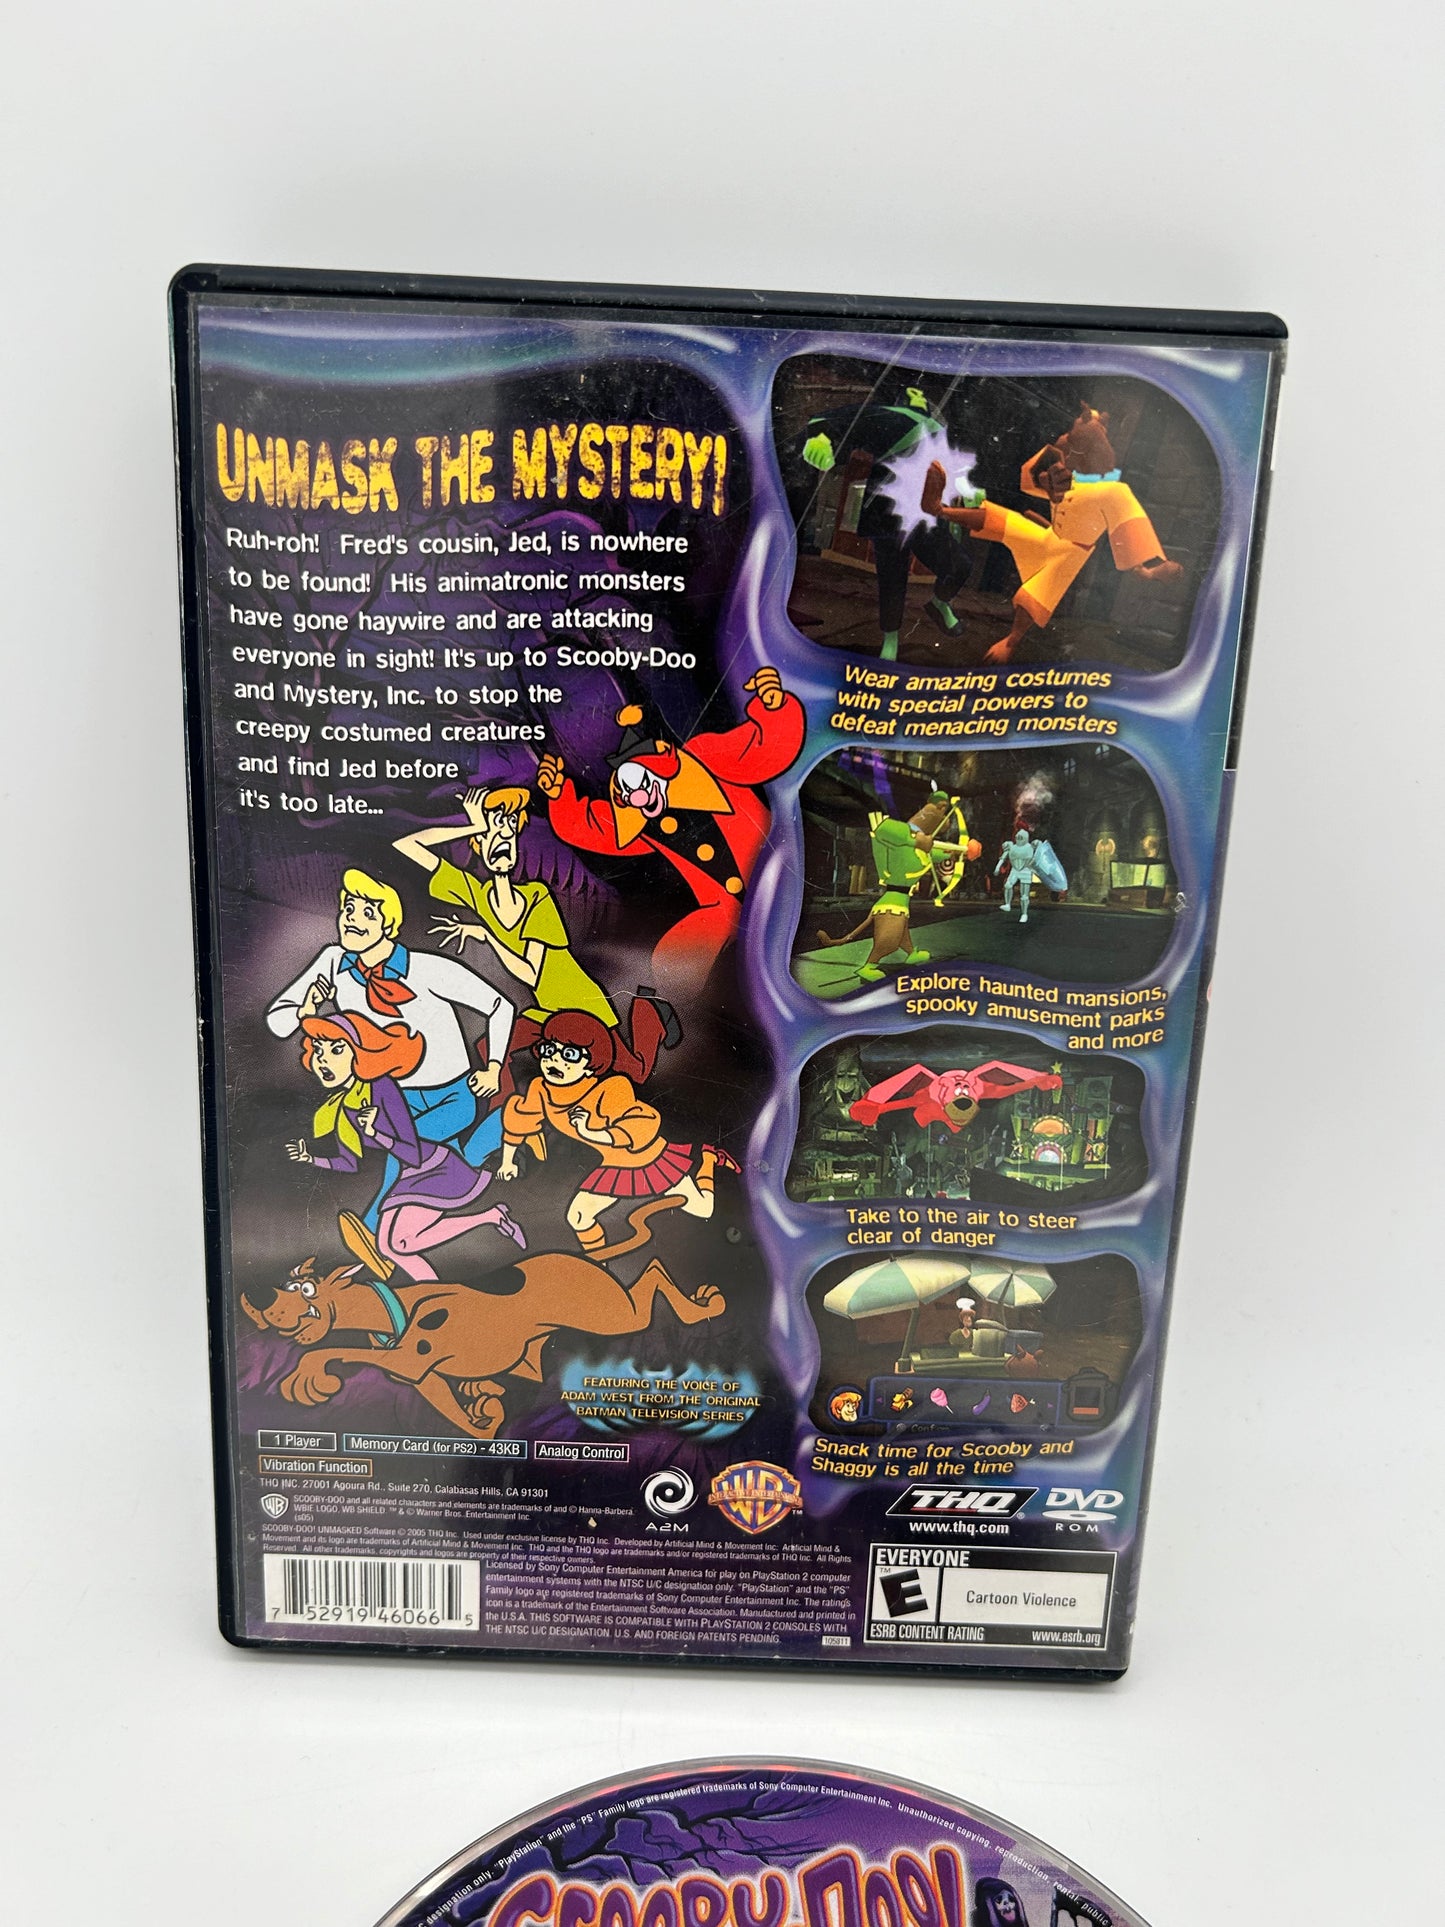 SONY PLAYSTATiON 2 [PS2] | SCOOBY-DOO UNMASKED